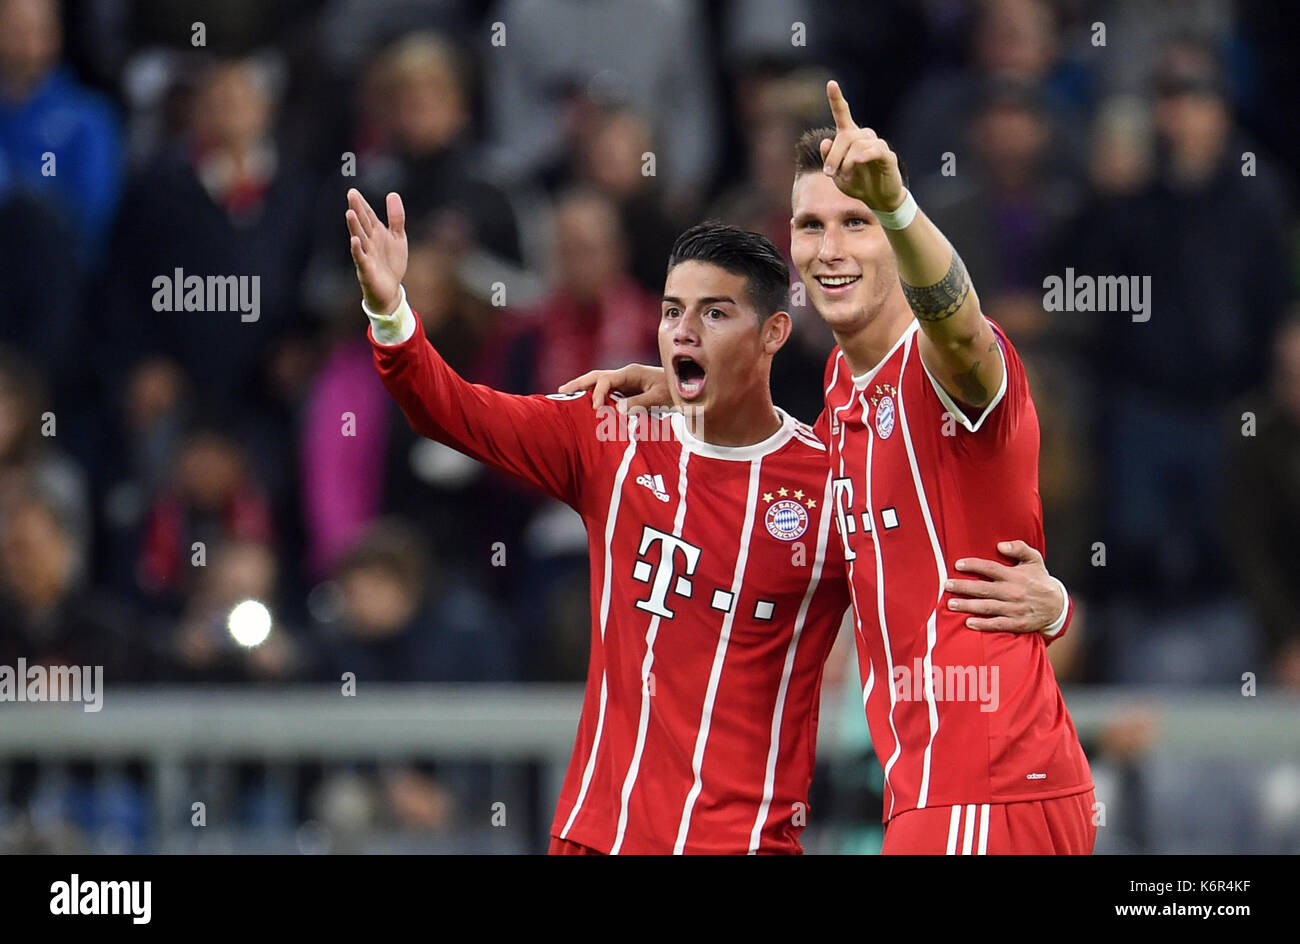 Munich, Germany. 12th Sep, 2017. Muenchen's Niklas Suele (R) celebrates his still invalid goal next to James Rodriguez during the Champions League Group B match between Bayern Muenchen and RSC Anderlecht at the Allianz Arena in Munich, Germany, 12 September 2017. Photo: Andreas Gebert/dpa/Alamy Live News Stock Photo